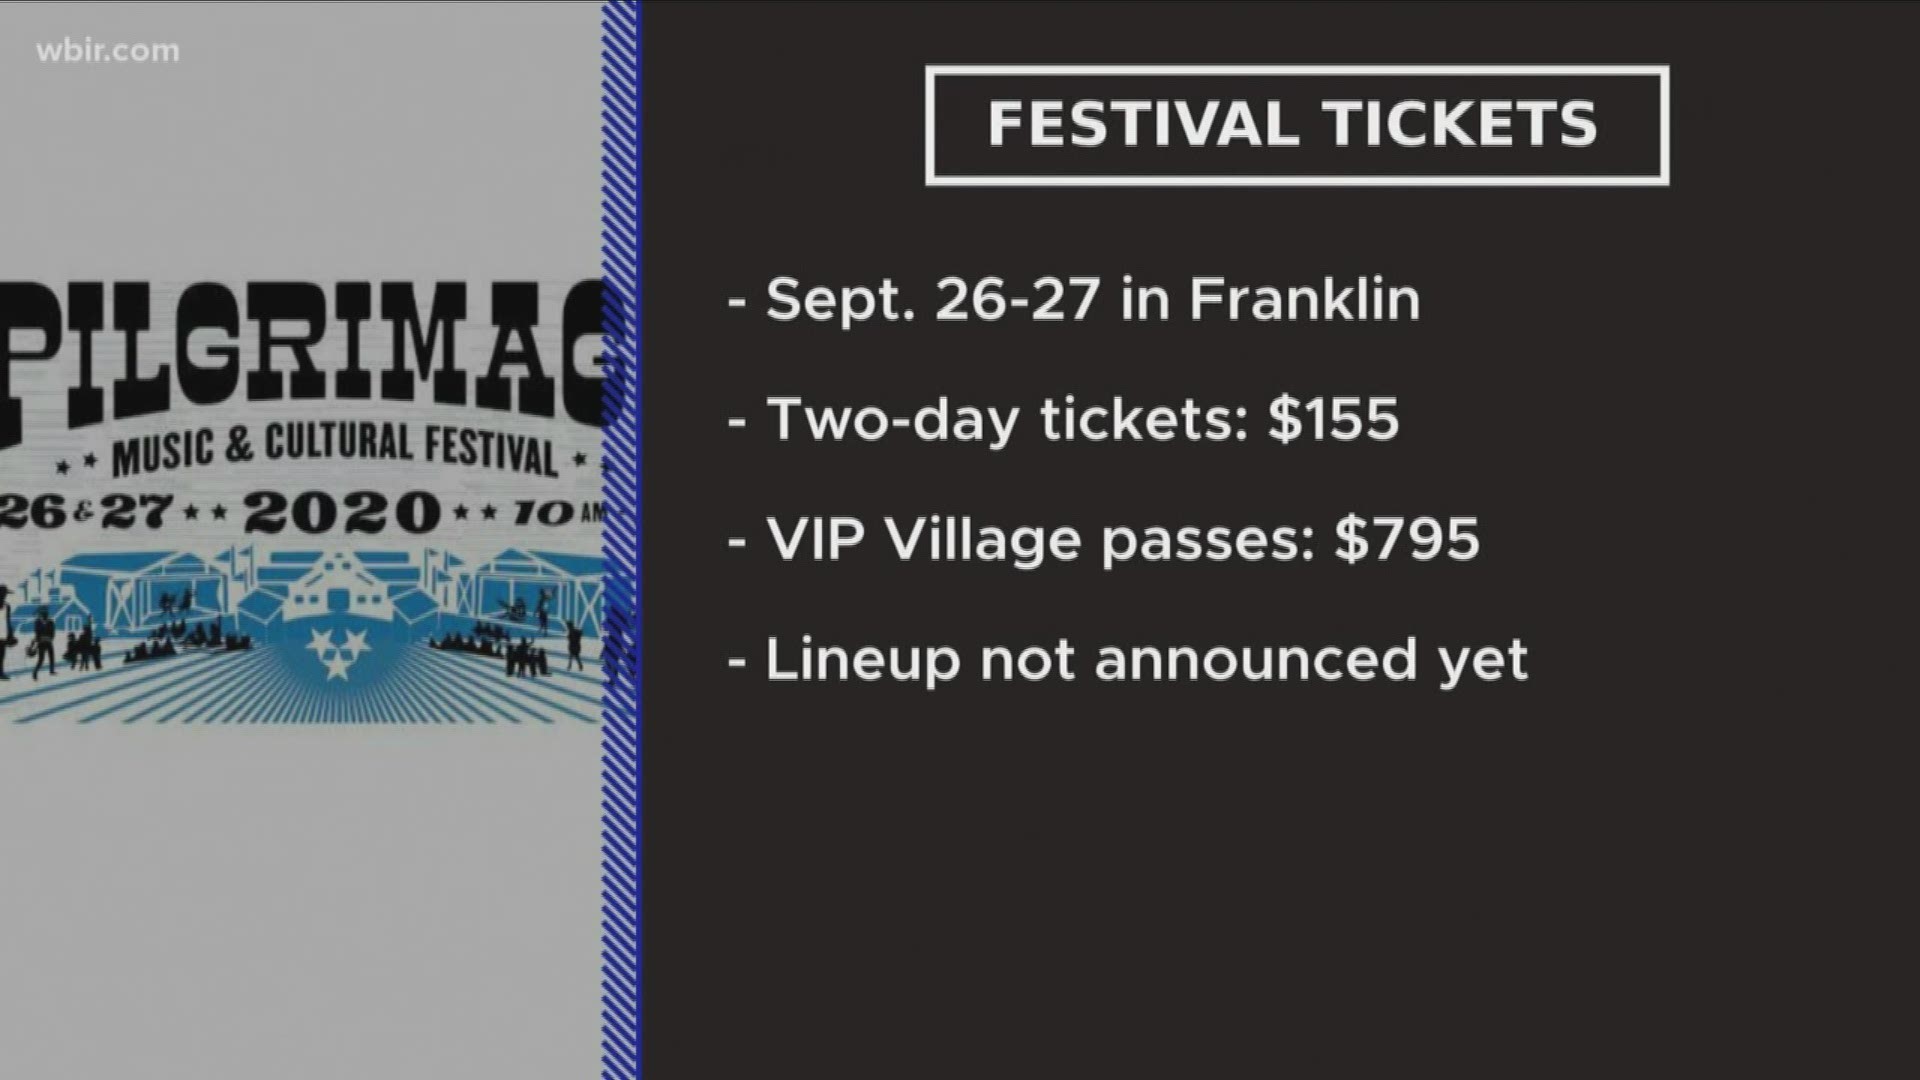 Tickets are now available for the 2020 Pilgrimage Music Festival.